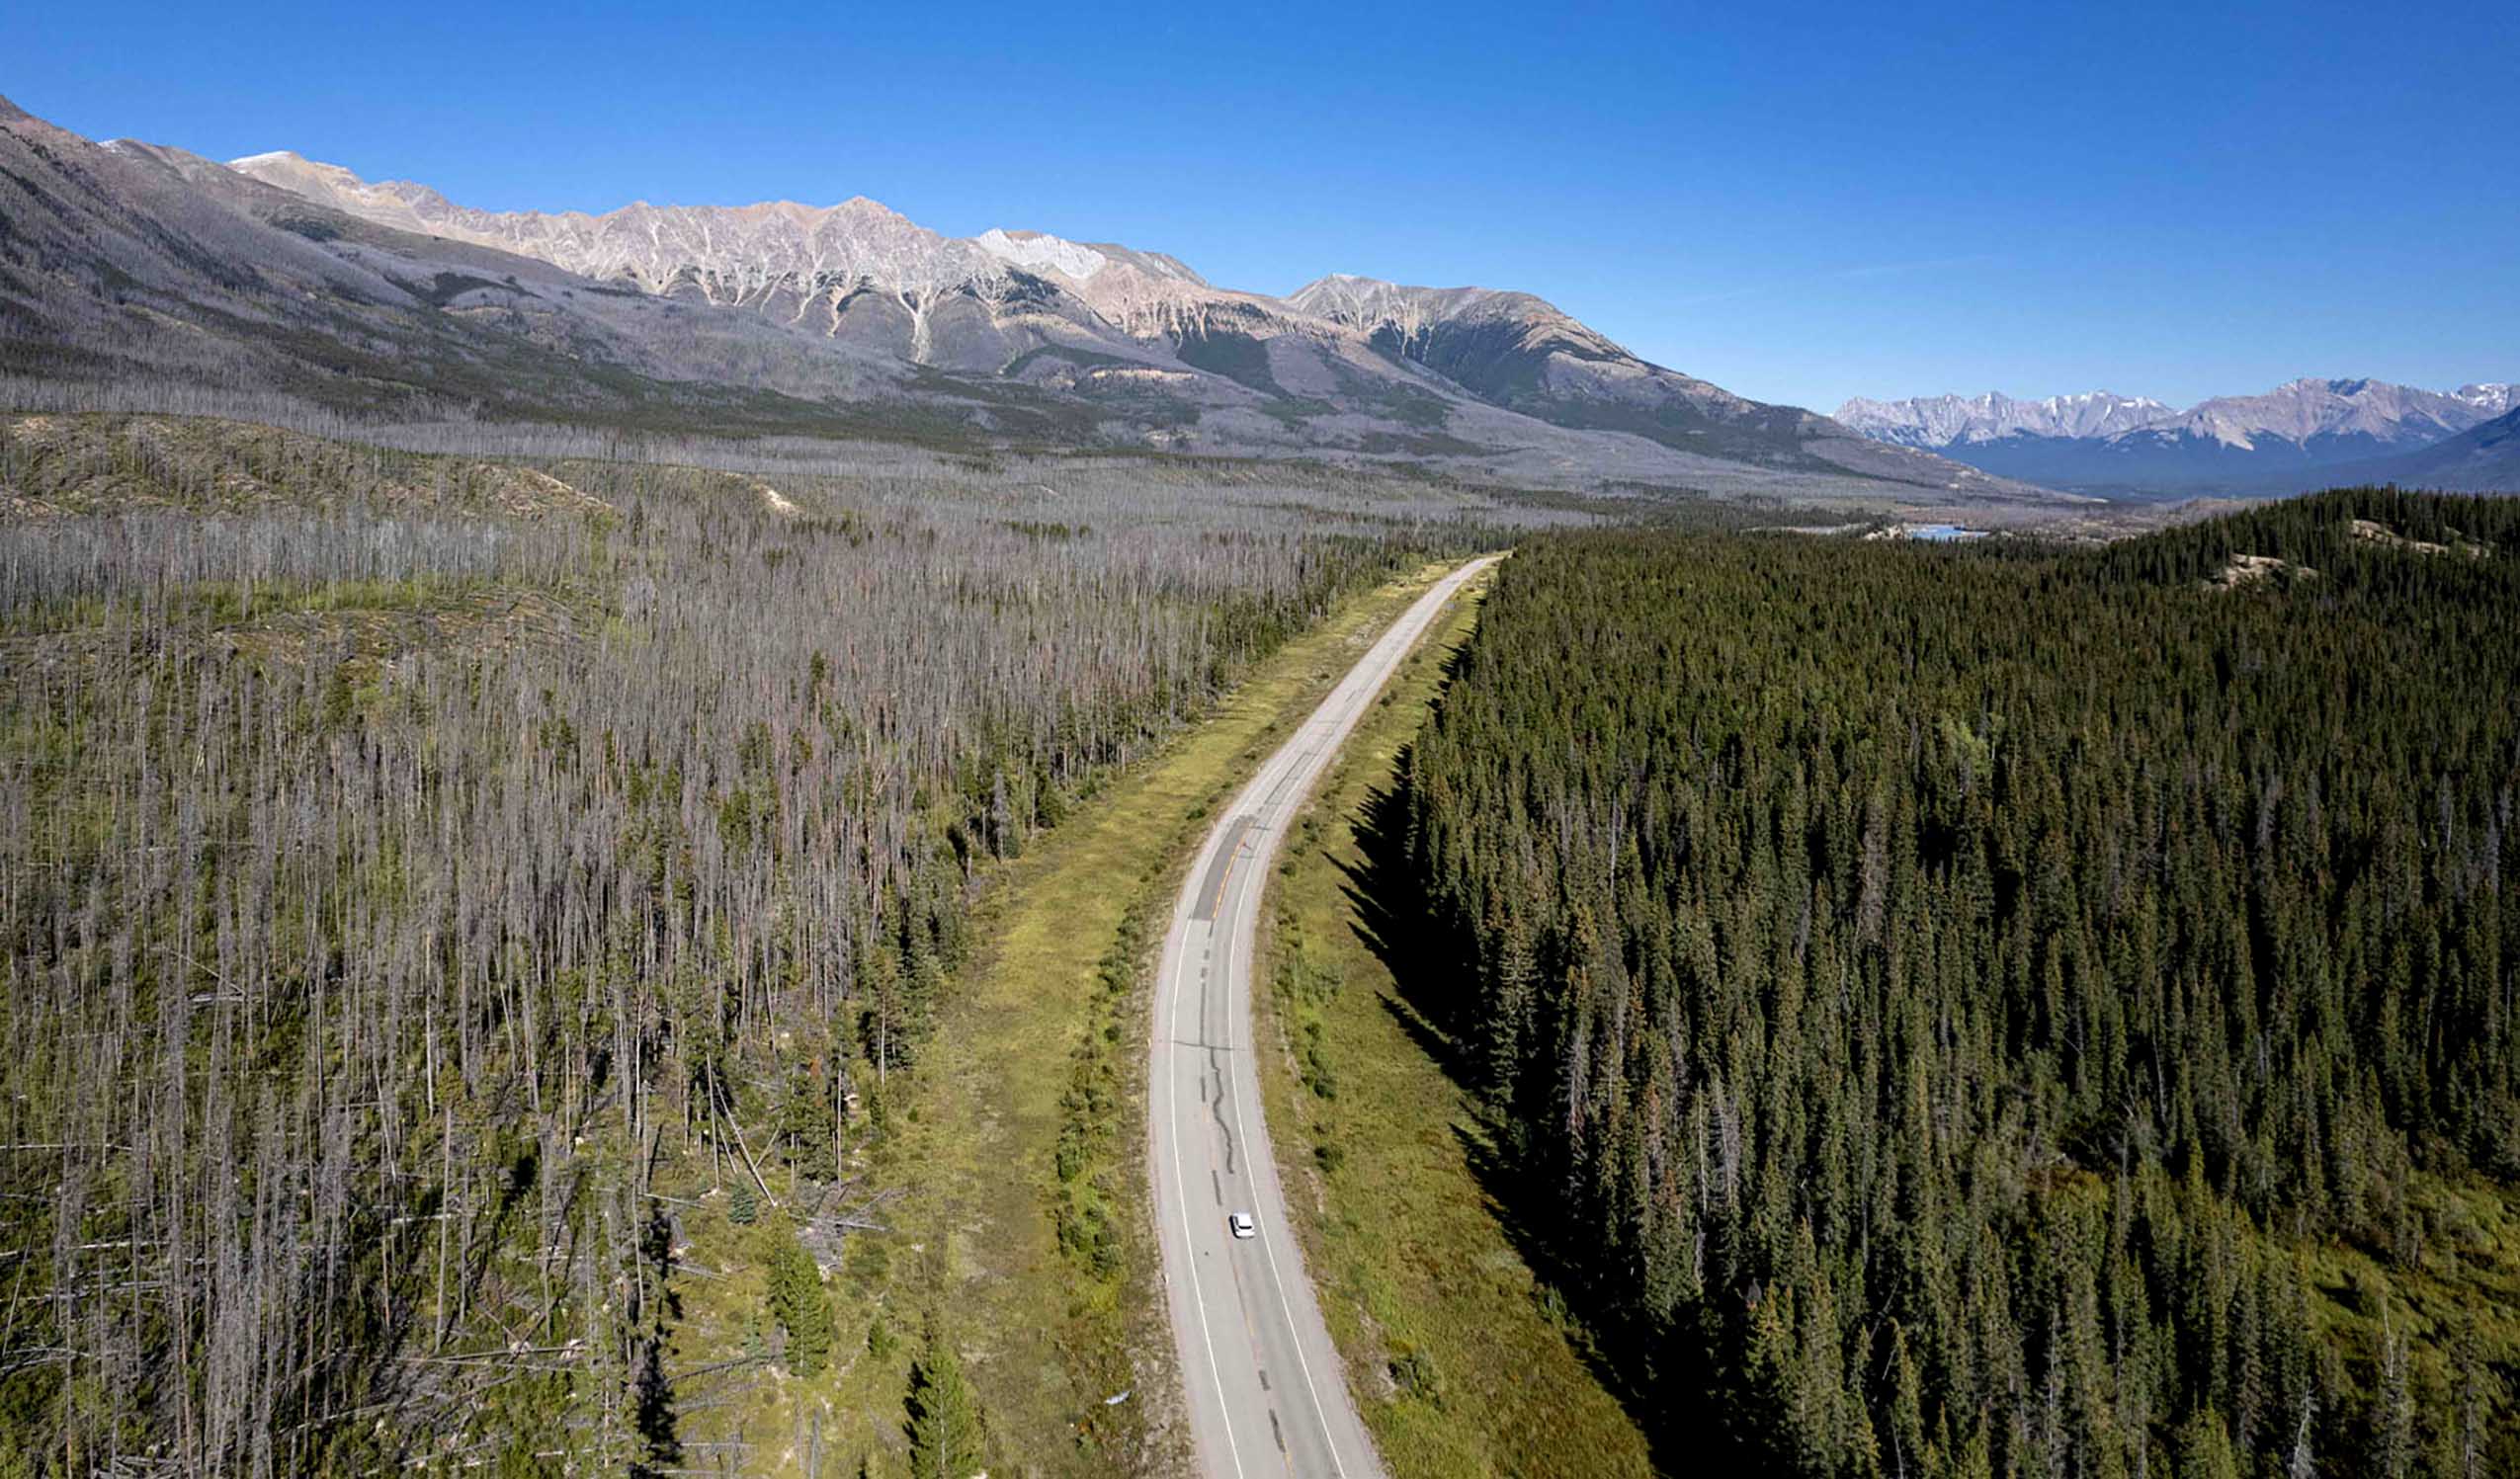 a general view shows fire damaged trees near Saskatchewan river crossing between the Banff and Jasper national parks, in Alberta, Canada. - The Canadian government on November 24, 2022, unveiled a CAN$1.6 billion (US$1.2 billion) plan to help the country deal with the looming dangers of a warming world, such as floods, wildfires and extreme heat. The so-called climate adaptation strategy will fund programs to help Canadians shield themselves from heat waves, protect coastlines from rising seas and safeguard infrastructure, including in the far north, which is facing the thaw of permafrost, officials said. (Photo by Ed JONES / AFP)